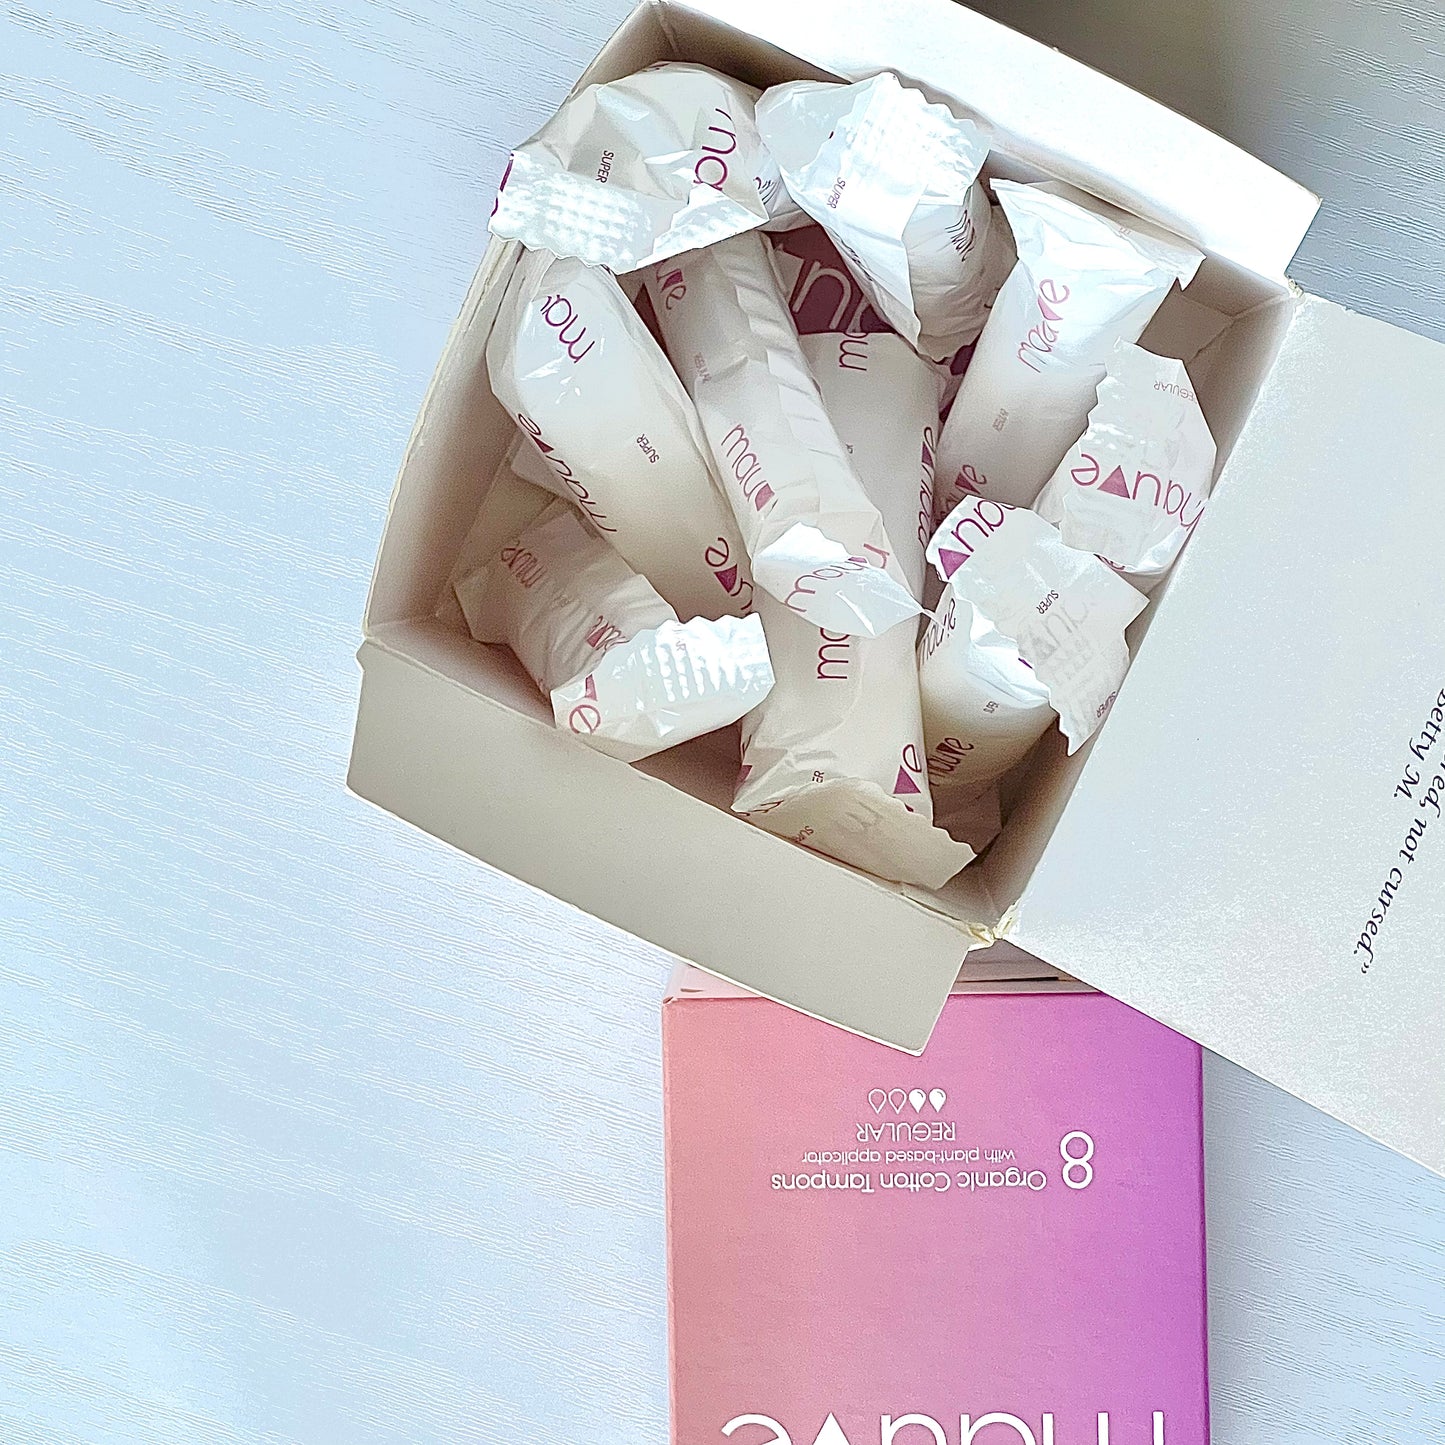 Plant-based Applicator Tampons